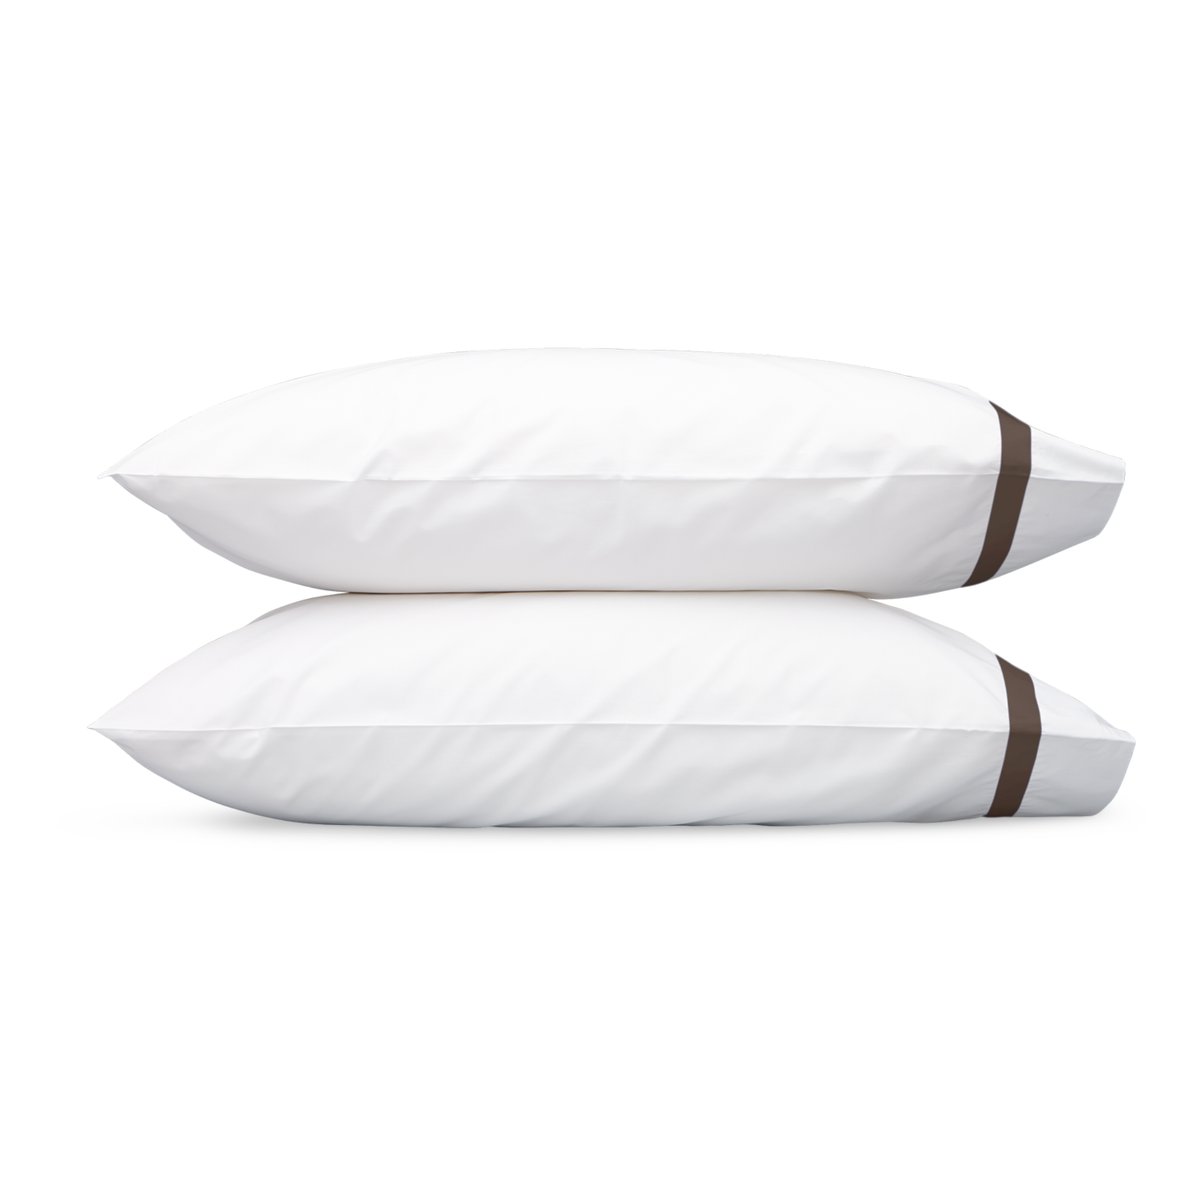 A Pair of Matouk Lowell Bedding Pillowcases in Sable Color